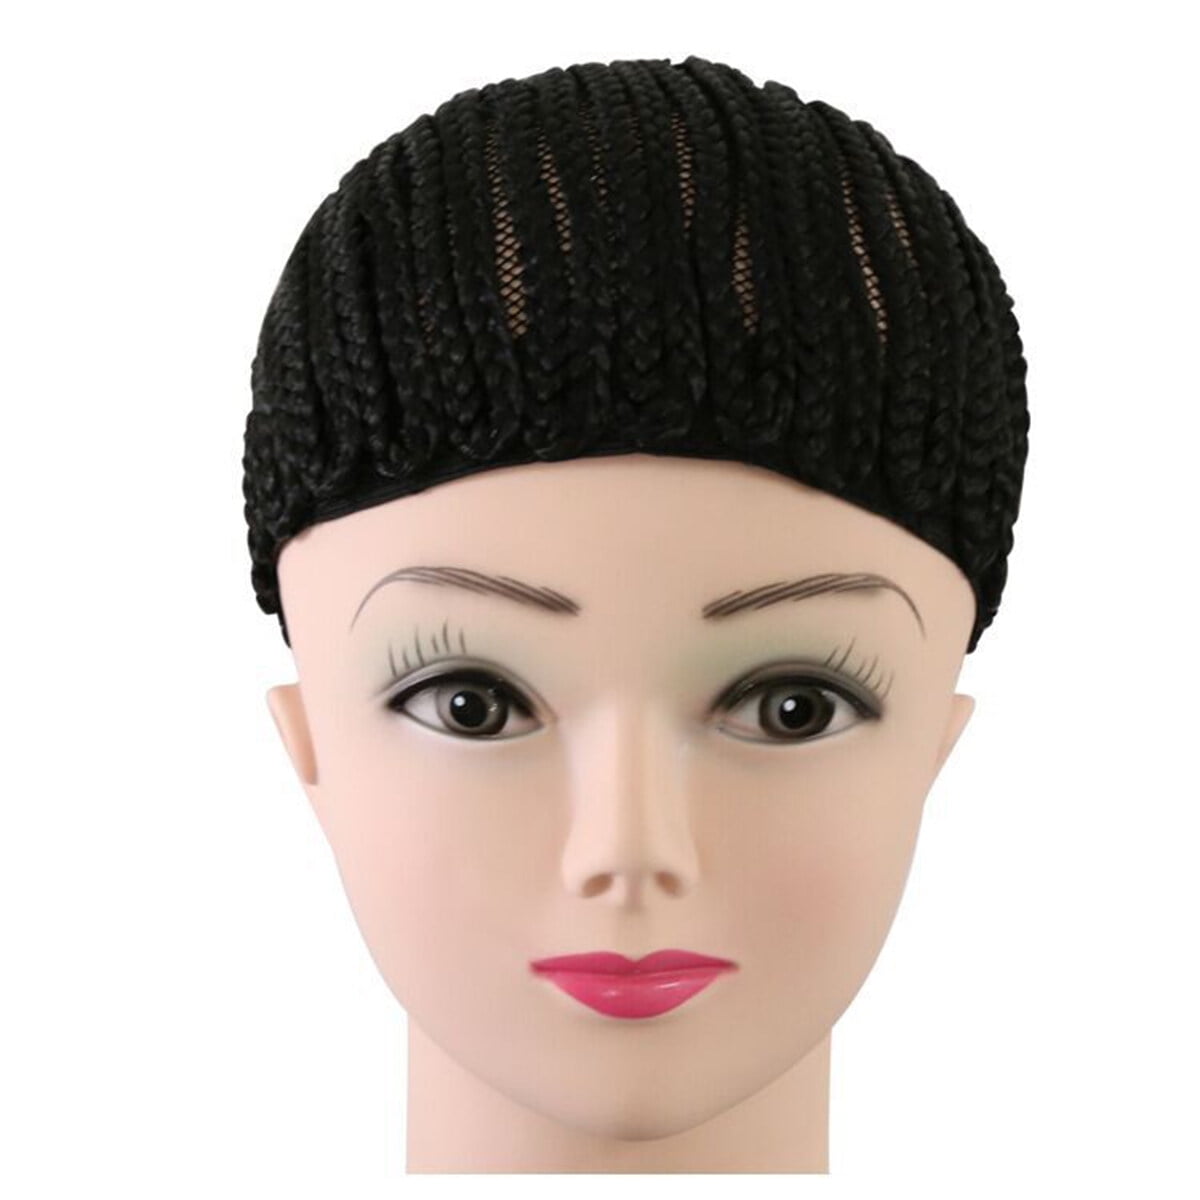 Dreamlover Black Wig Cap for Frontal, 12 Pieces